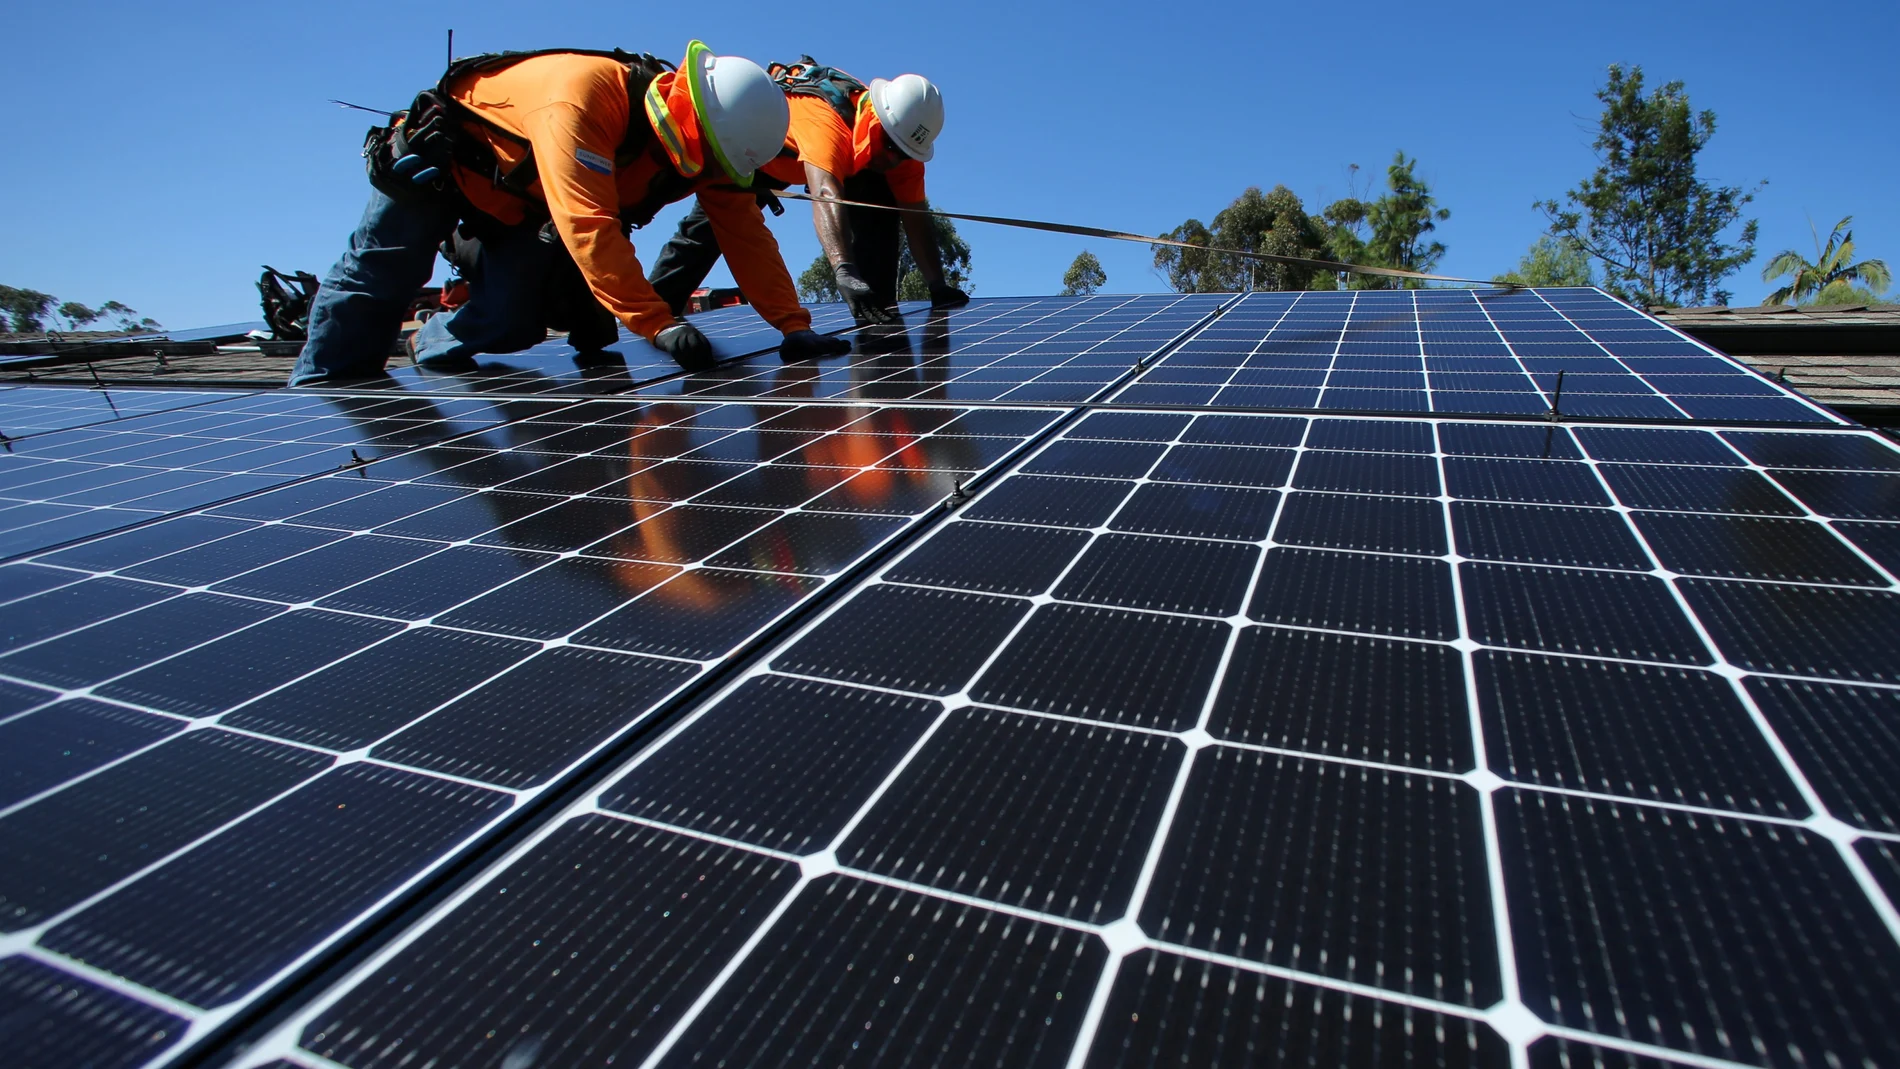 A solar installer from Baker Electric installs a solar panel on the roof of a residential home in Scripps Ranch, San Diego, California, U.S. October 14, 2016. Picture taken October 14, 2016. REUTERS/Mike Blake